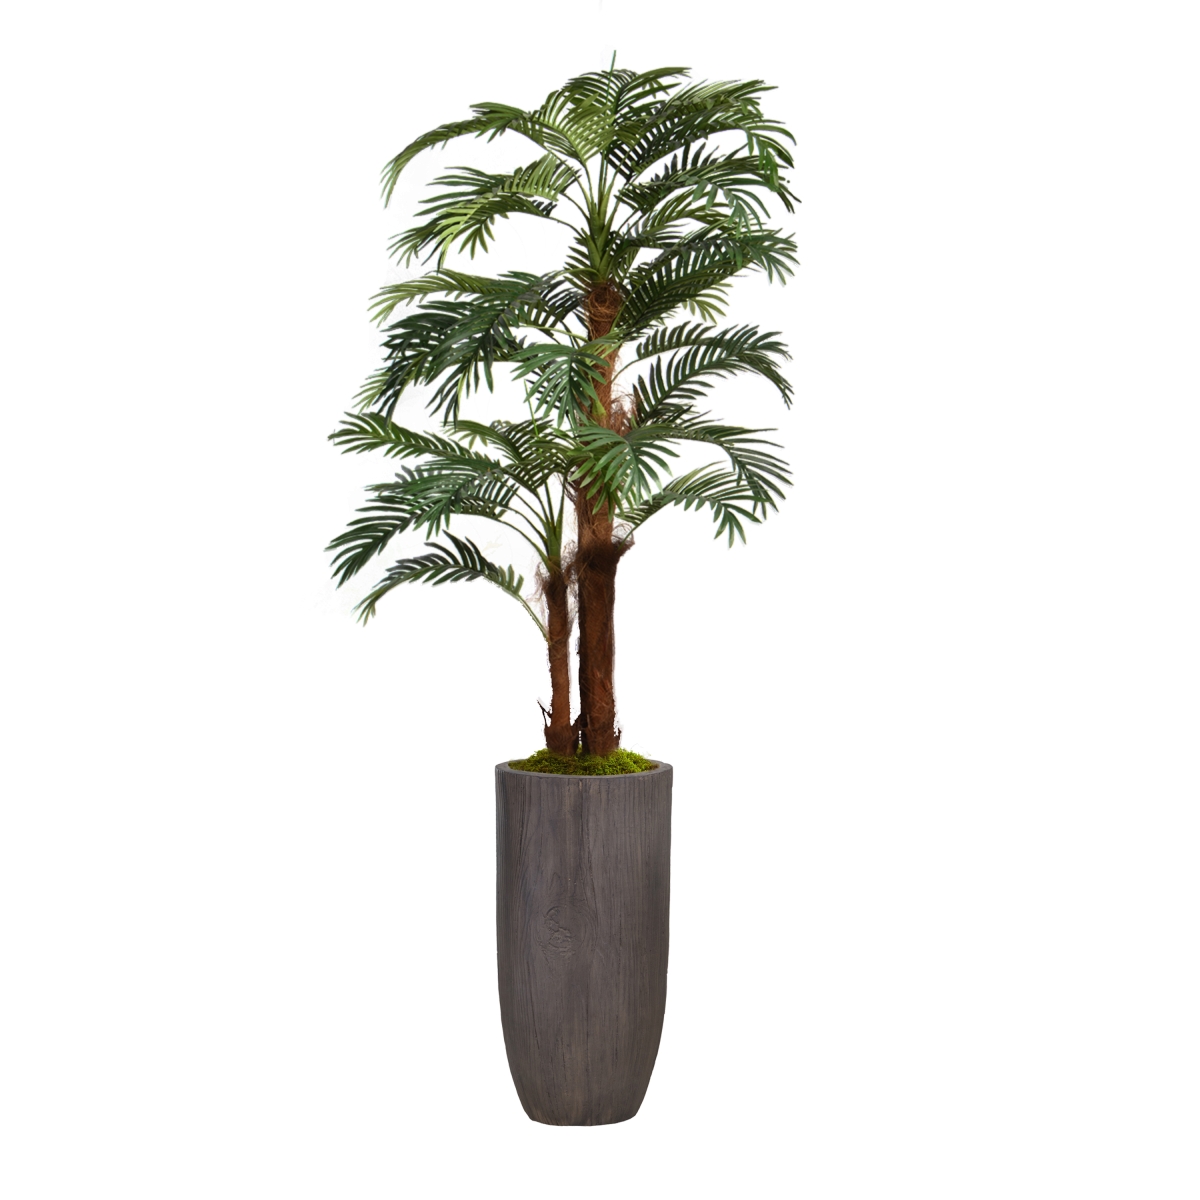 Vhx135224 80.25 In. Palm Tree Faux Decor With Burlap Kit In Resin Planter